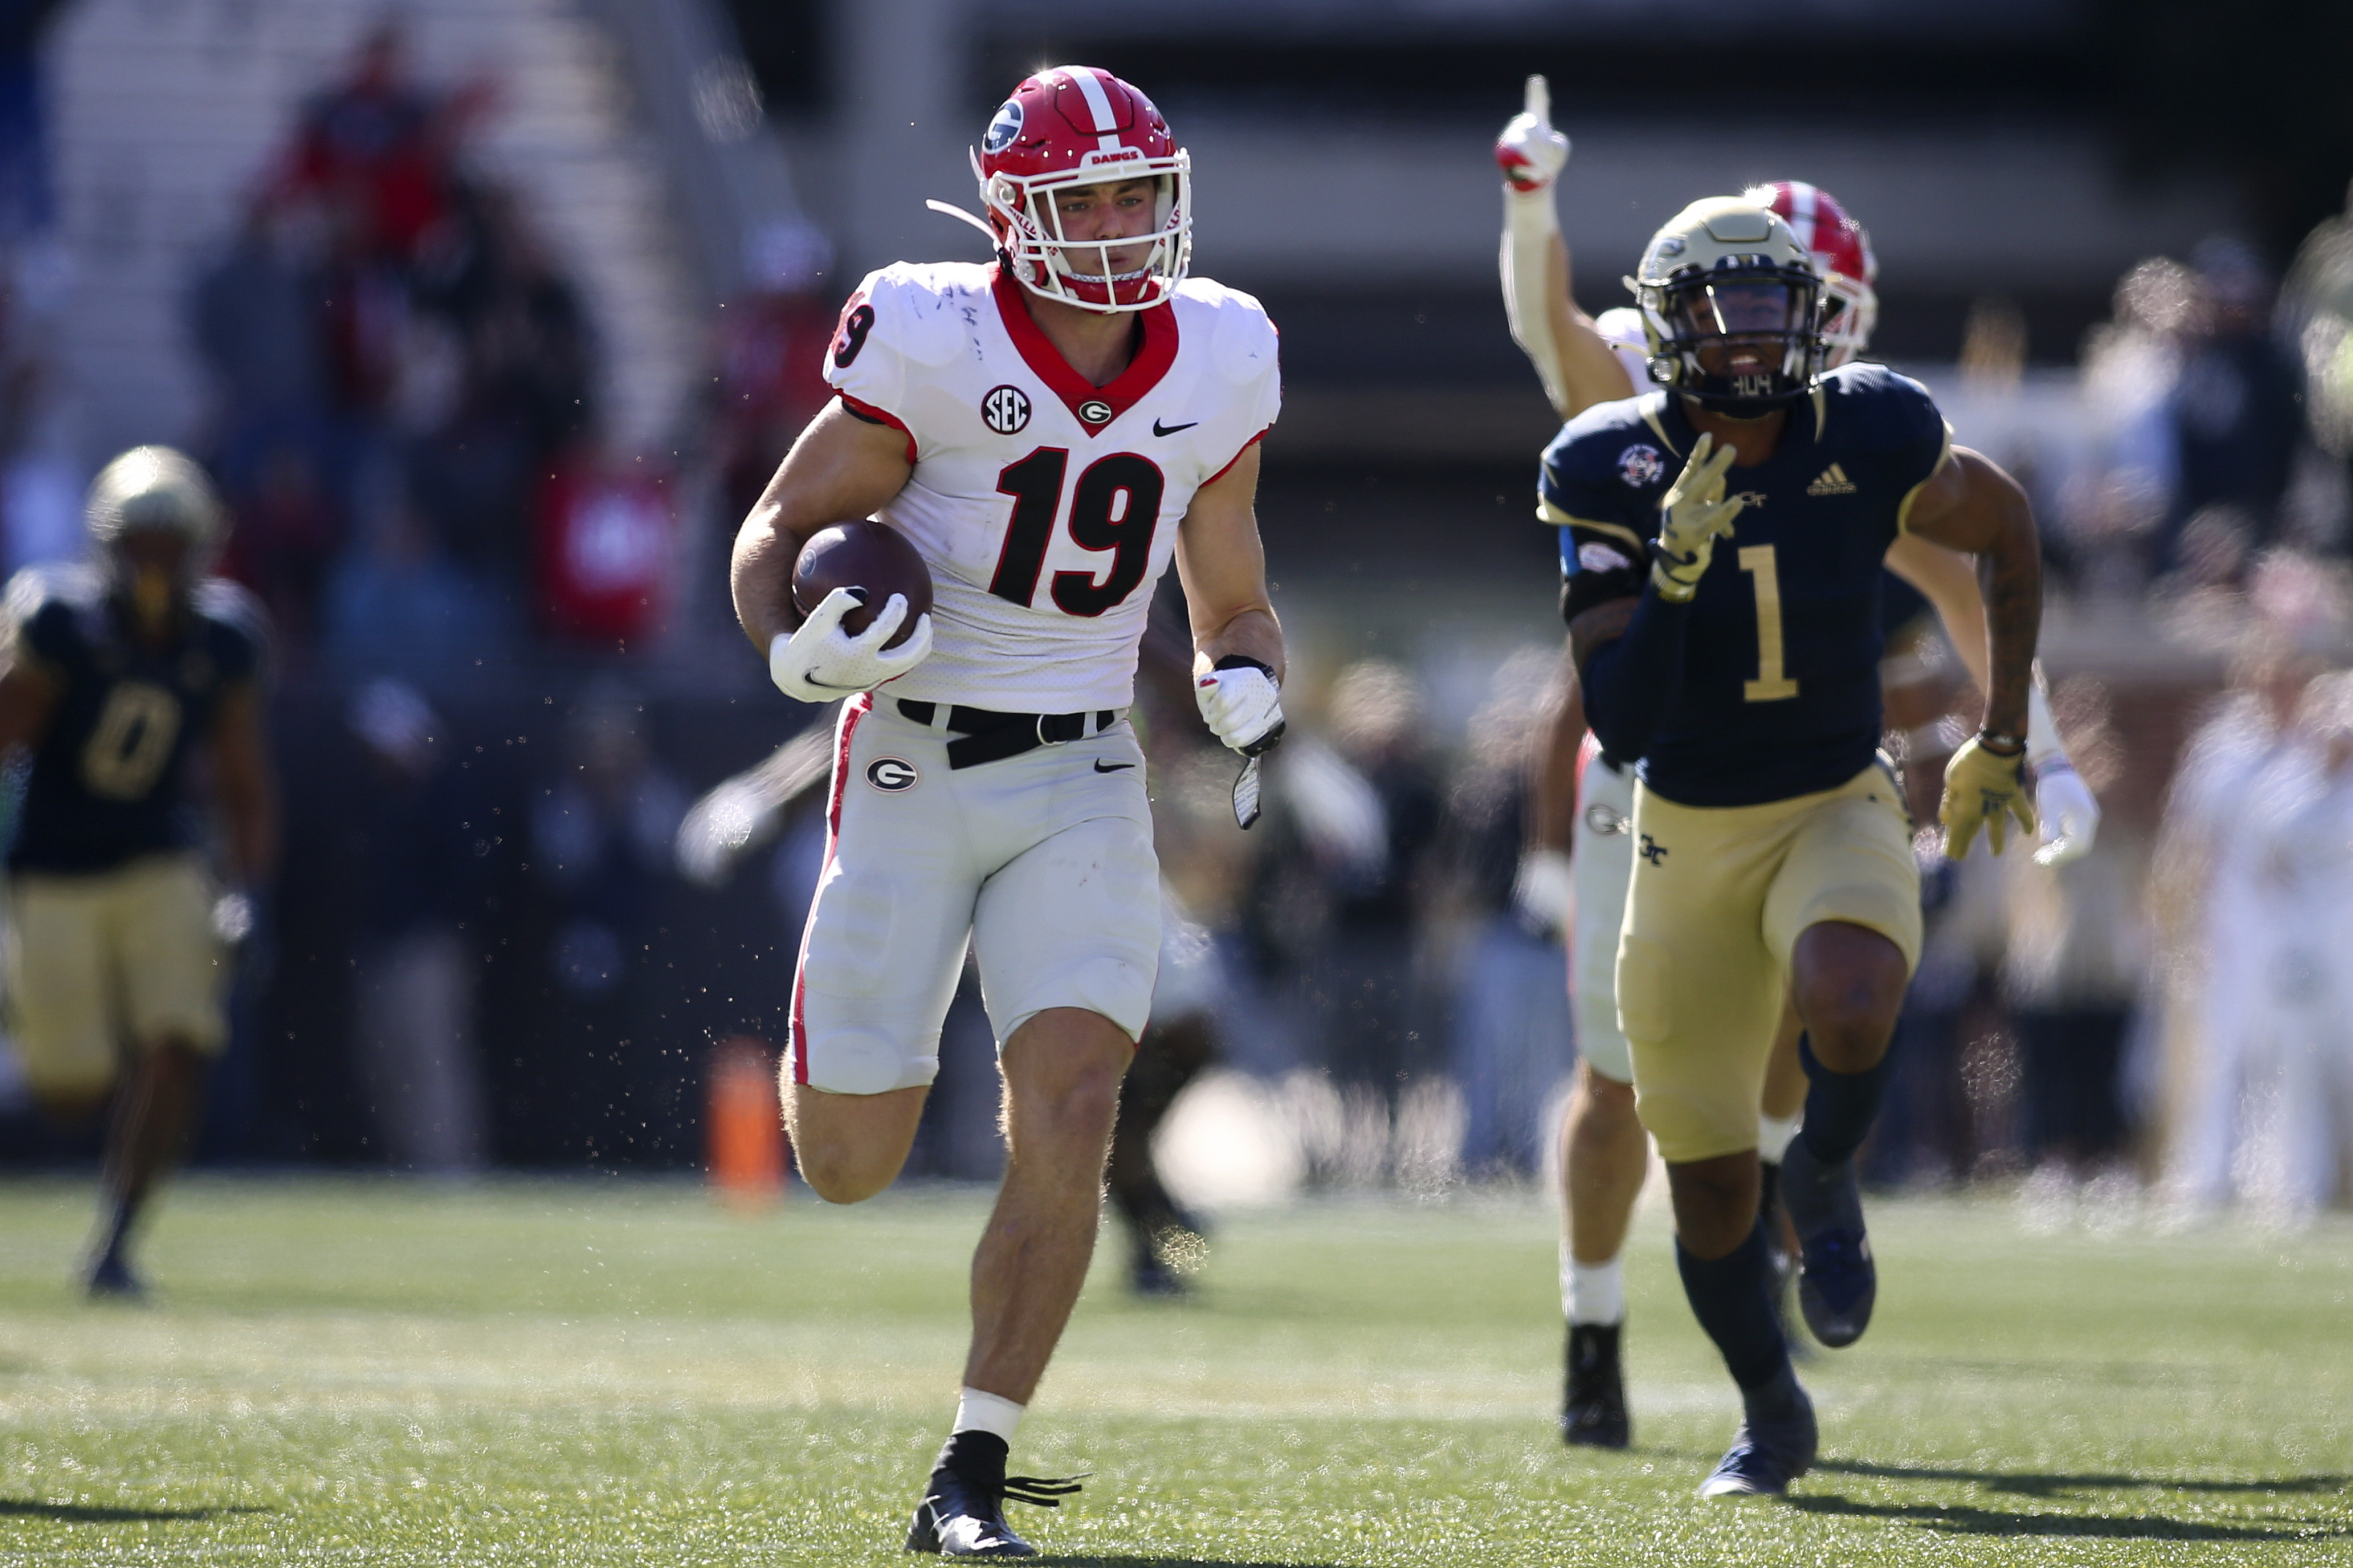 Georgia football: It's just getting started for Brock Bowers